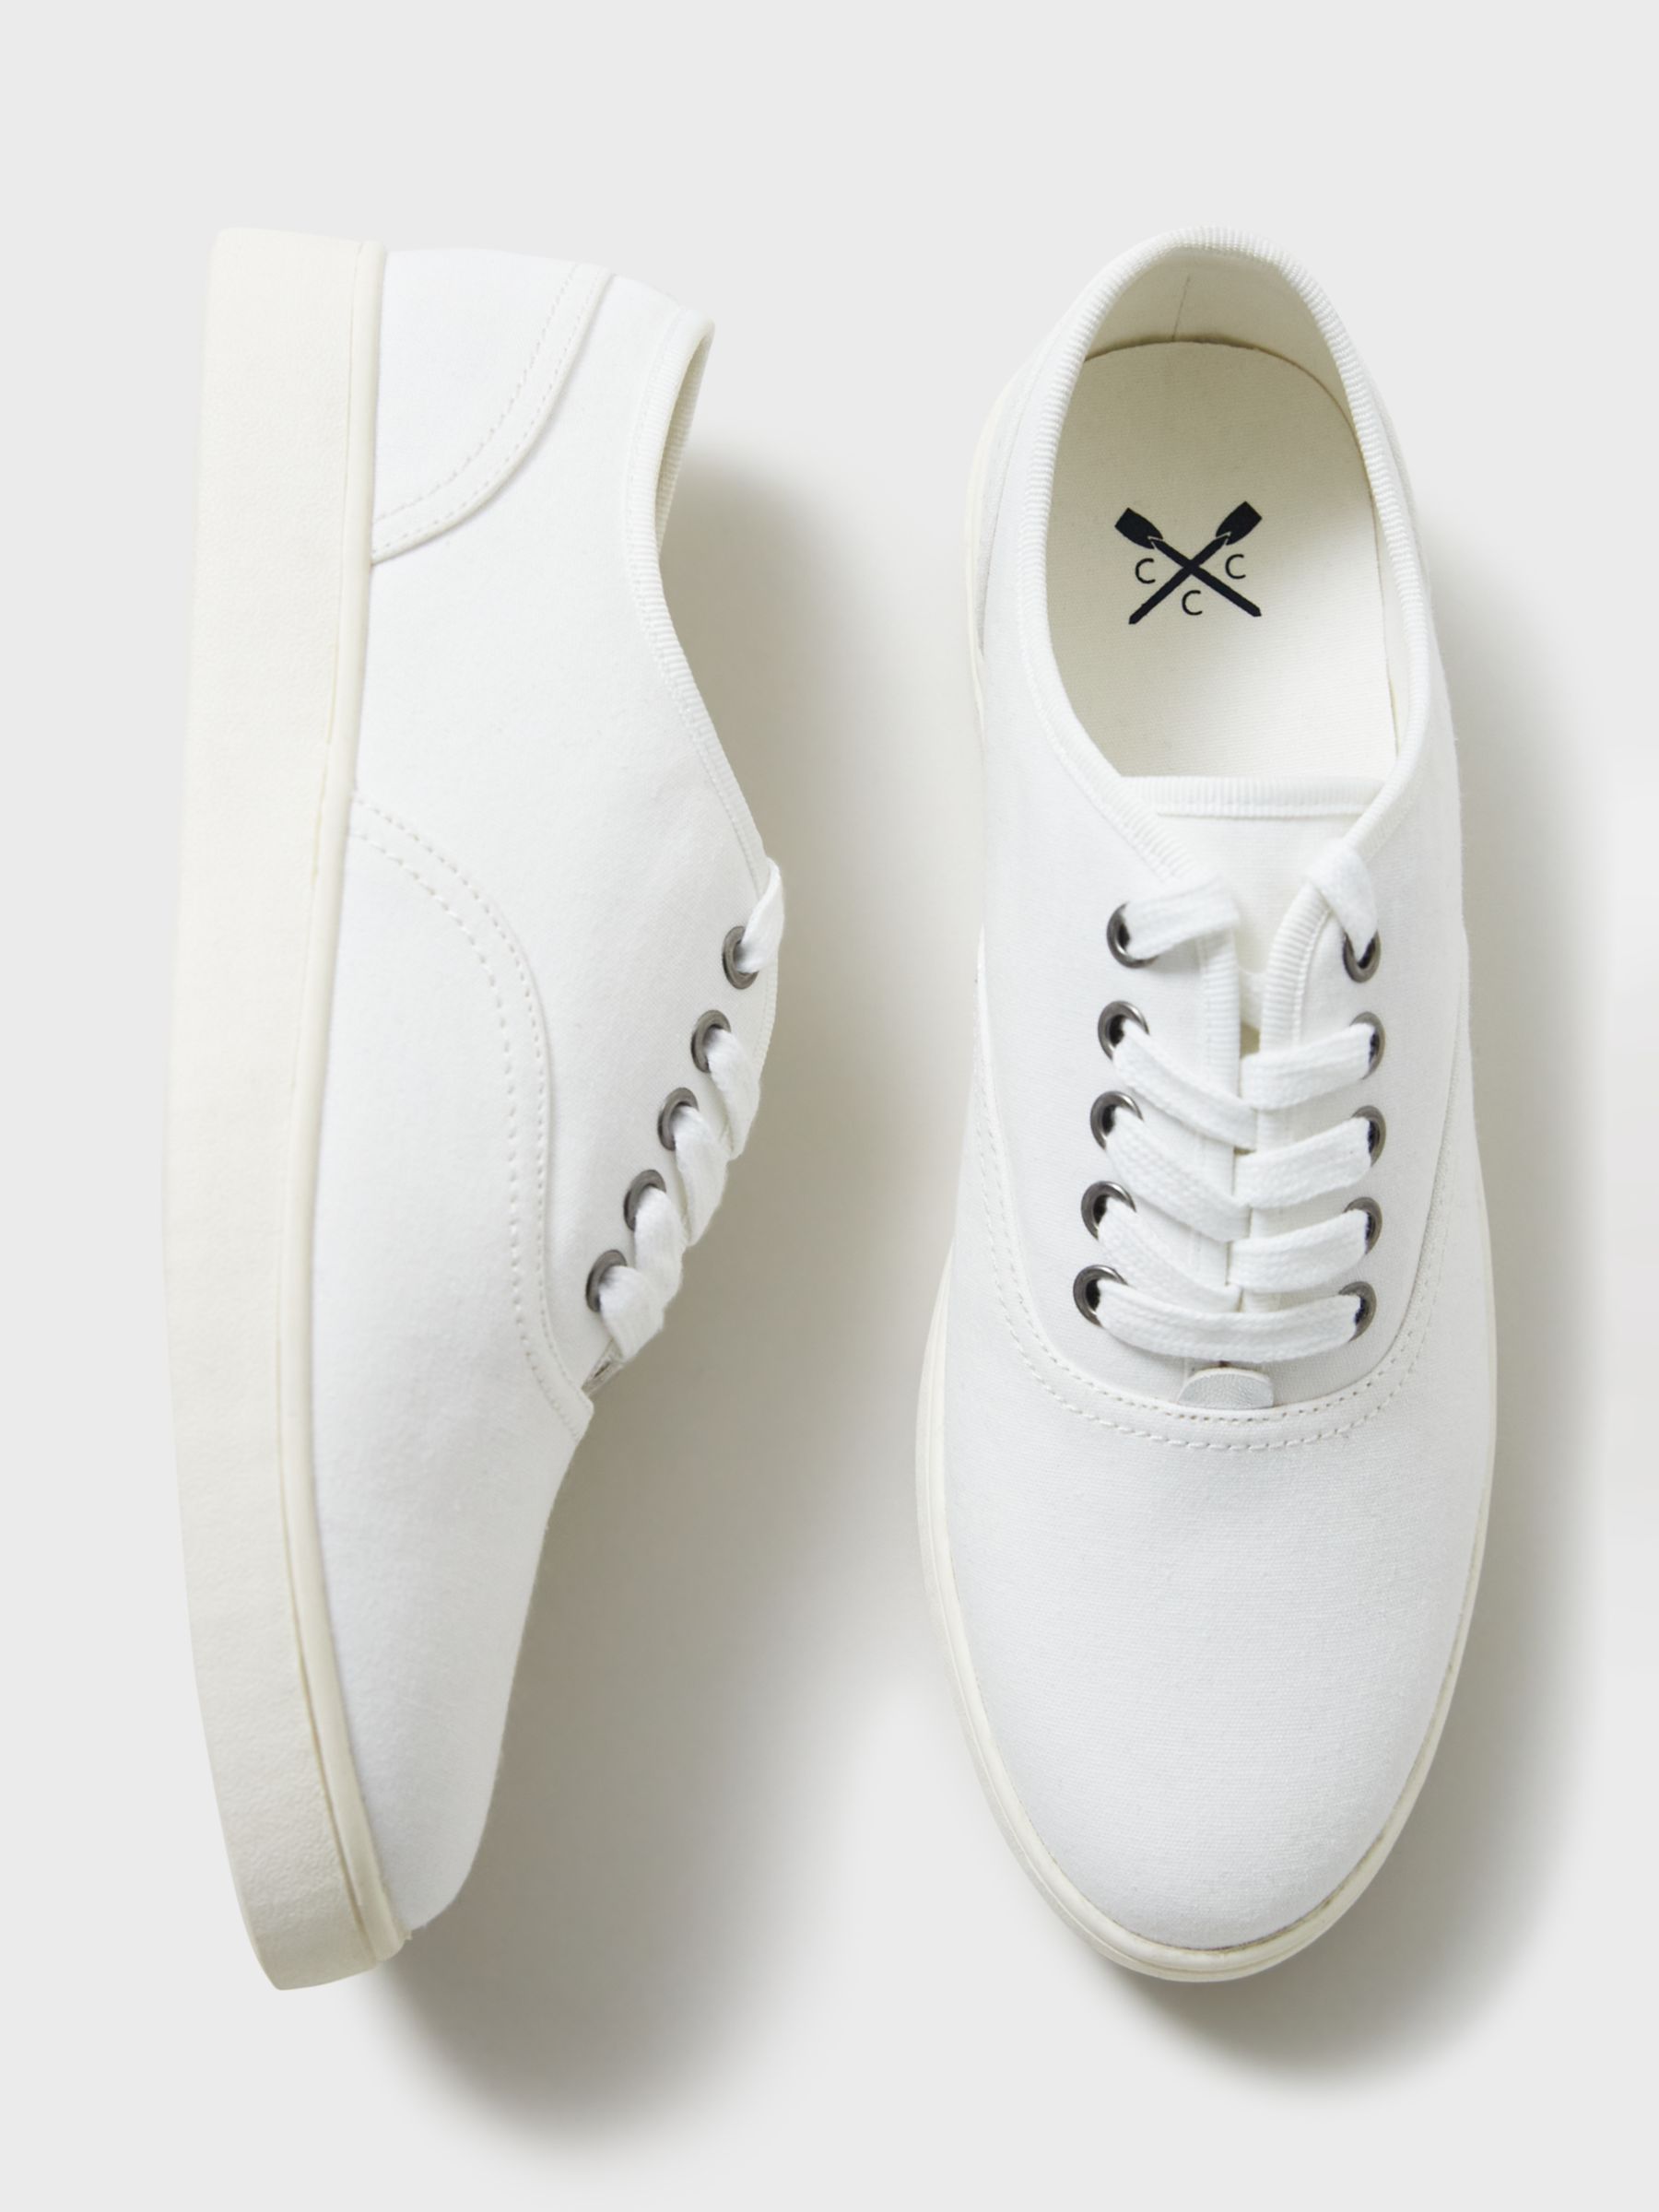 Buy Crew Clothing Canvas Oxford Trainers Online at johnlewis.com